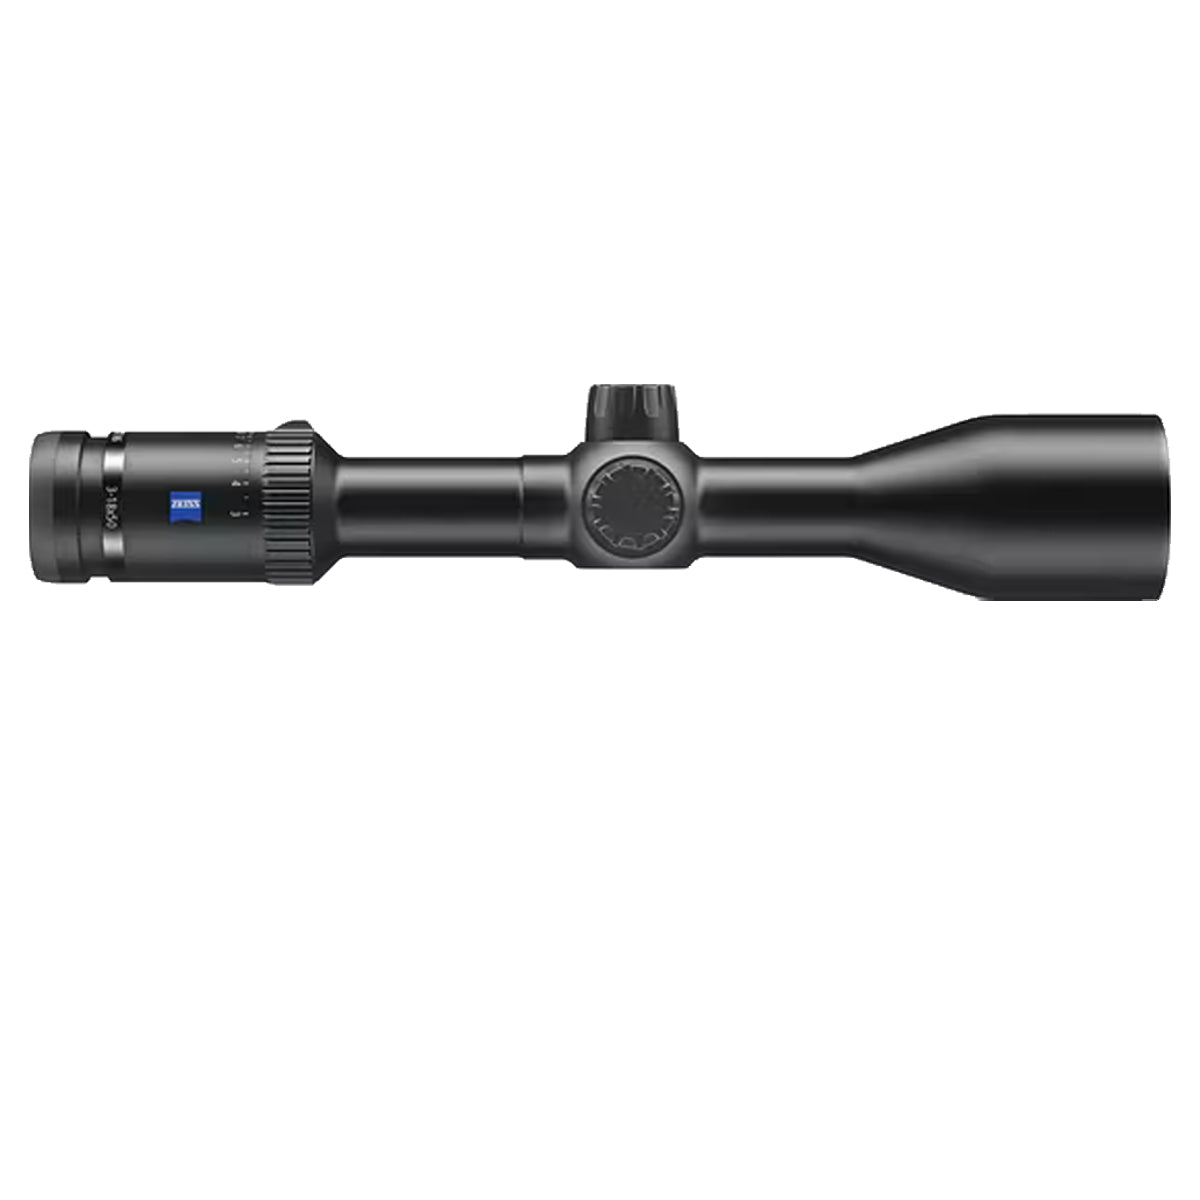 Zeiss Conquest V6 3-18x50 w/ZMOA-2 #94 Reticle Riflescope